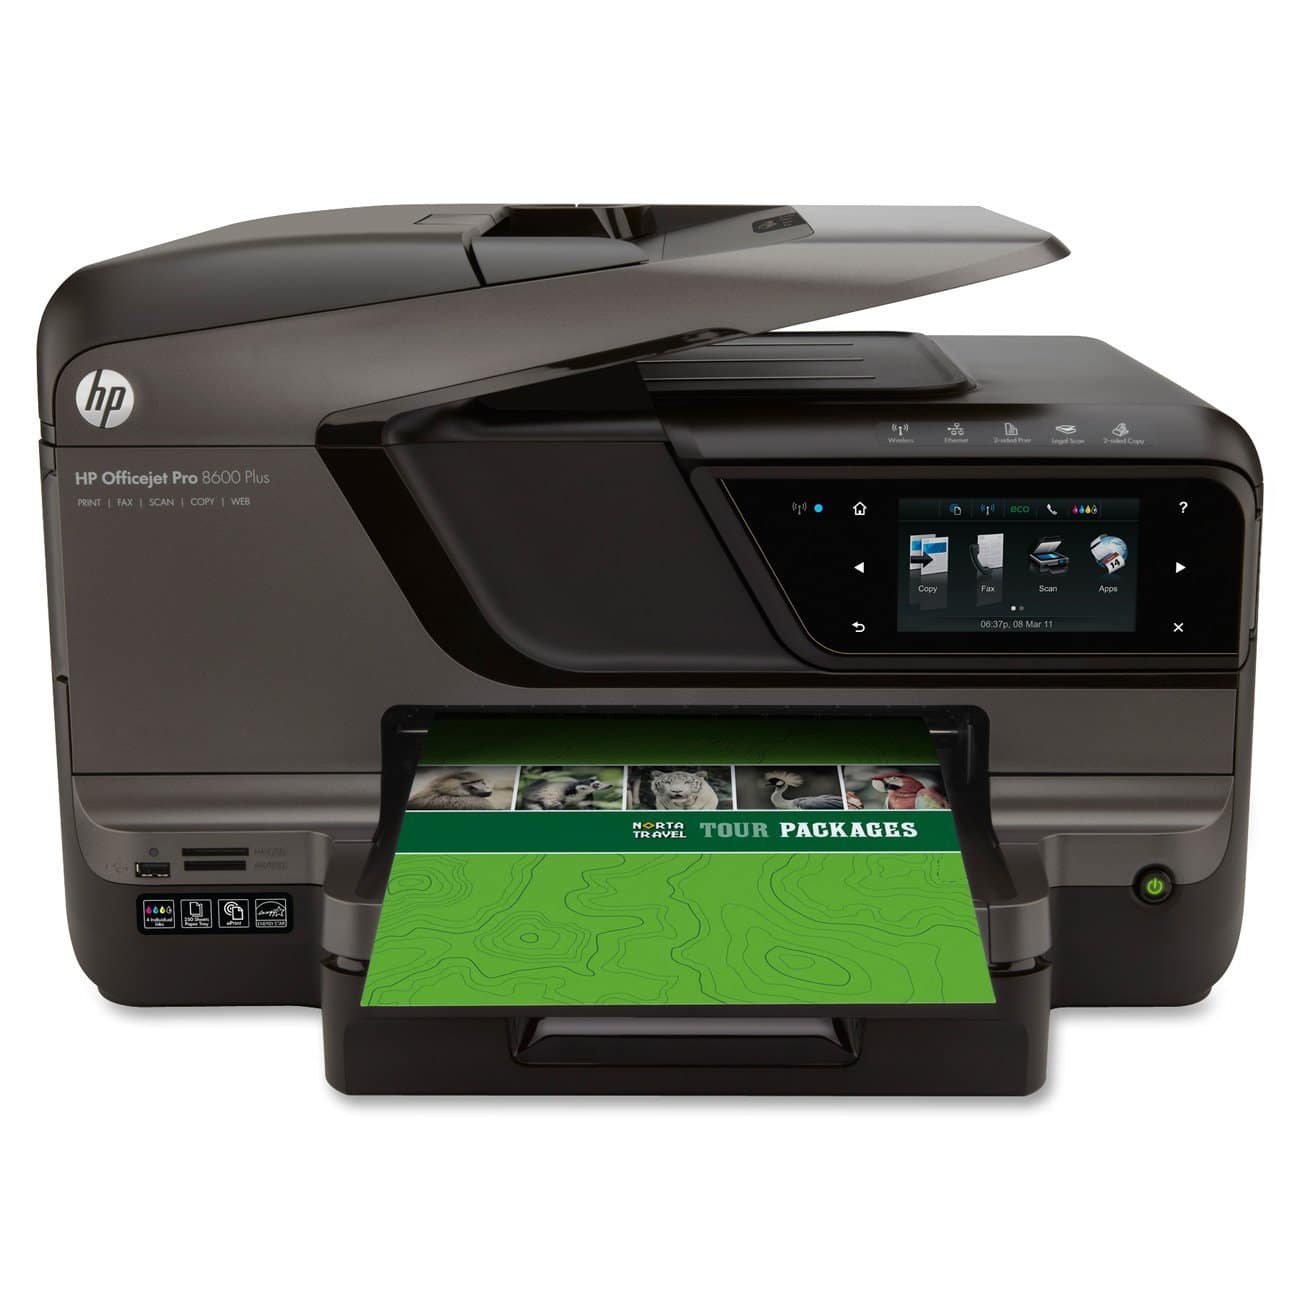 hp scanjet 2200c driver files for windows 7